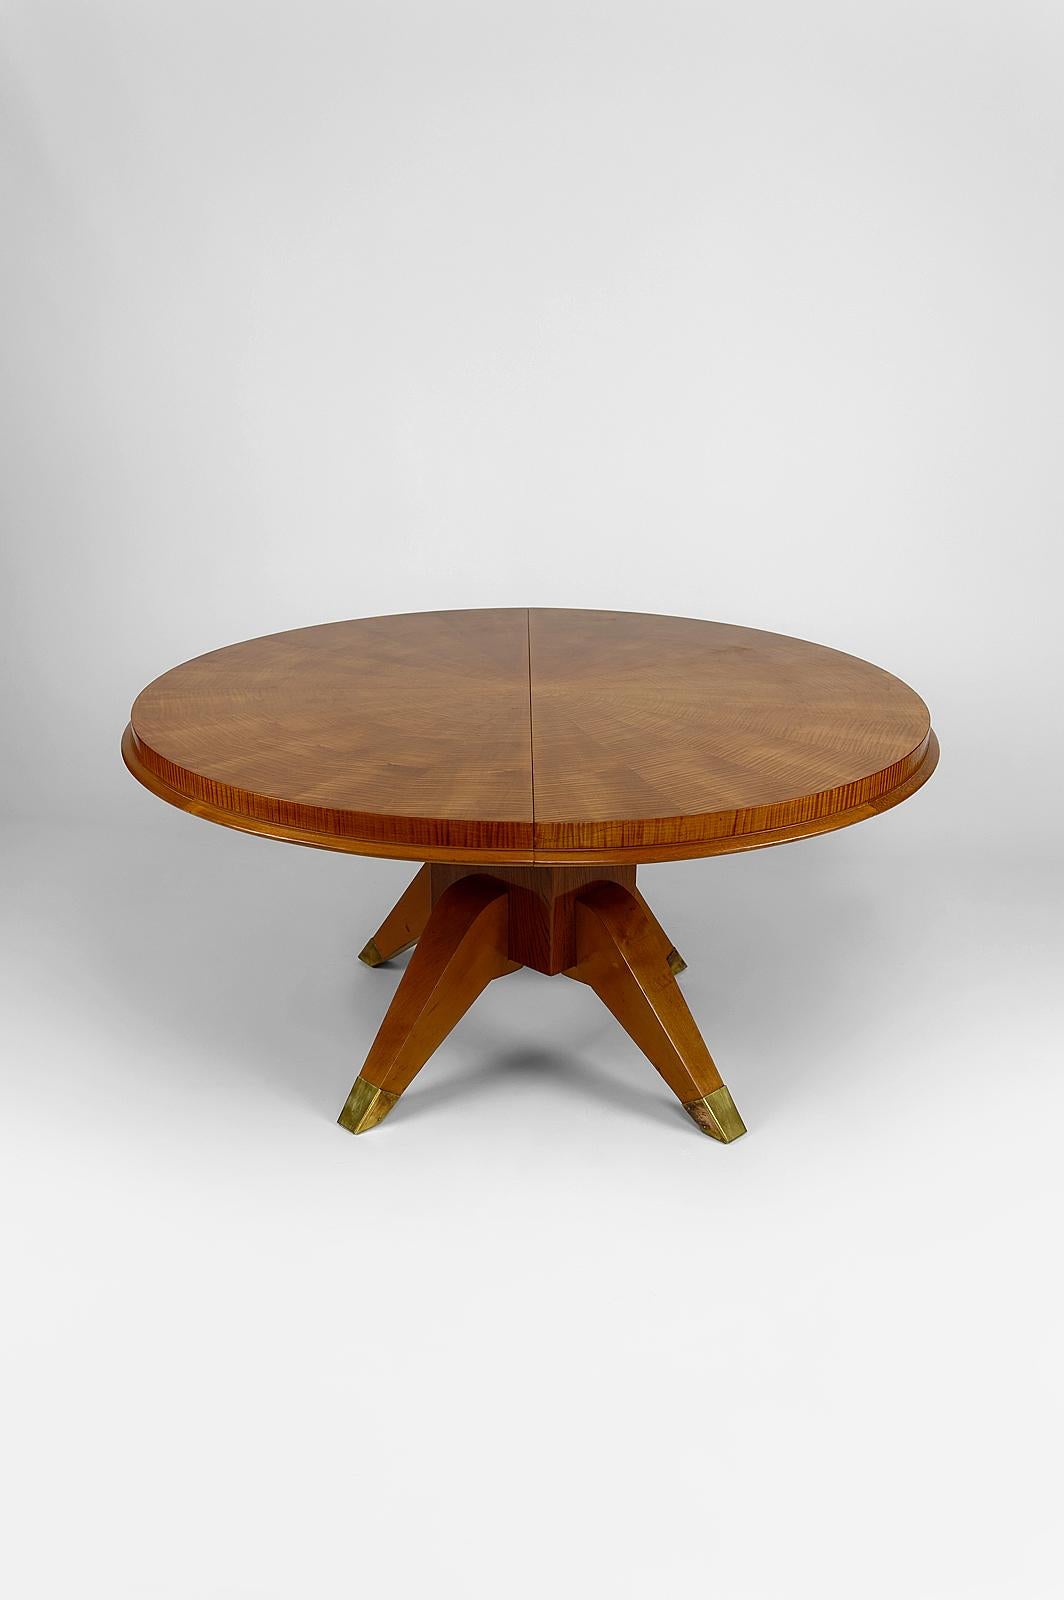 French Round Art Deco Coffee Table in Maple Wood, France, circa 1940